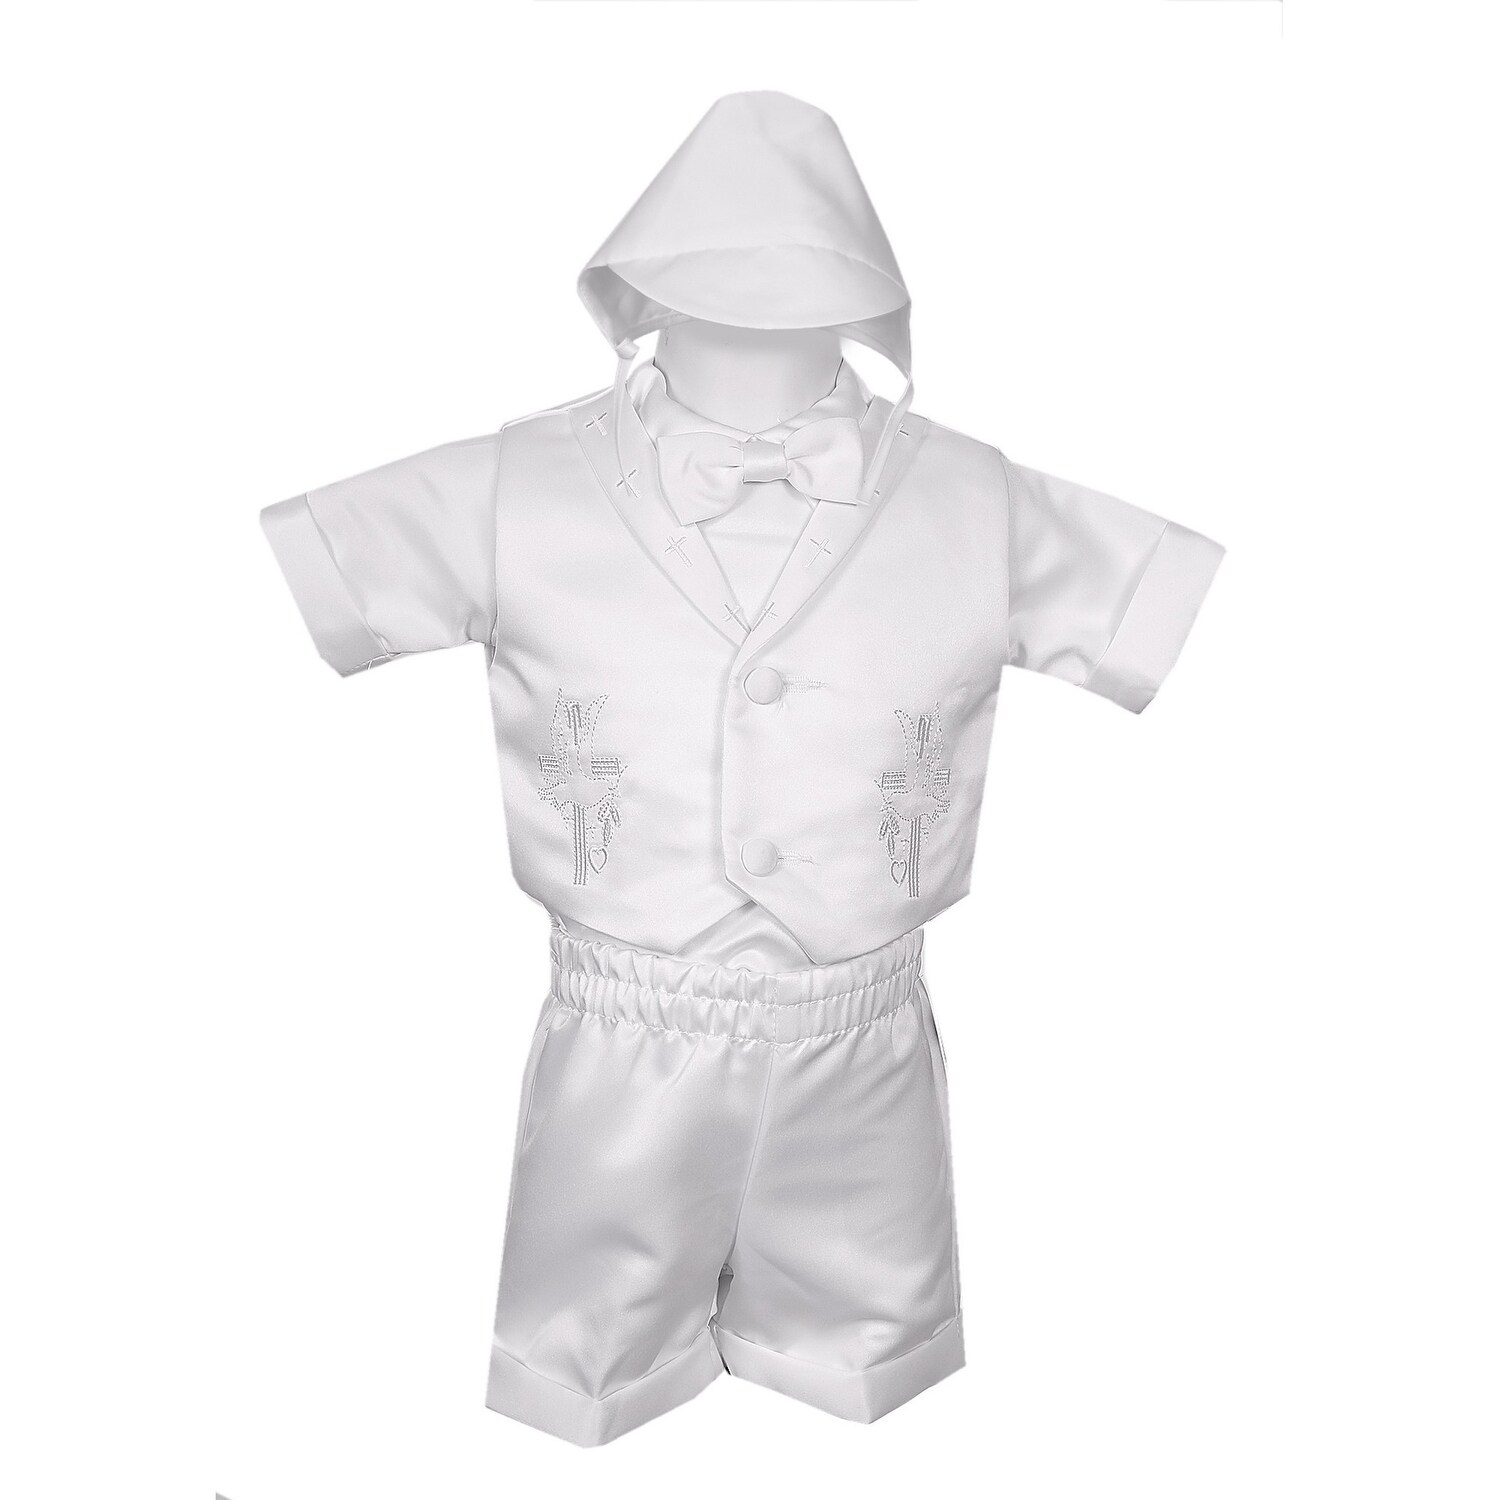 Christening Suit 4pc Sailor Suit White Navy Baby Boys Christening Outfit